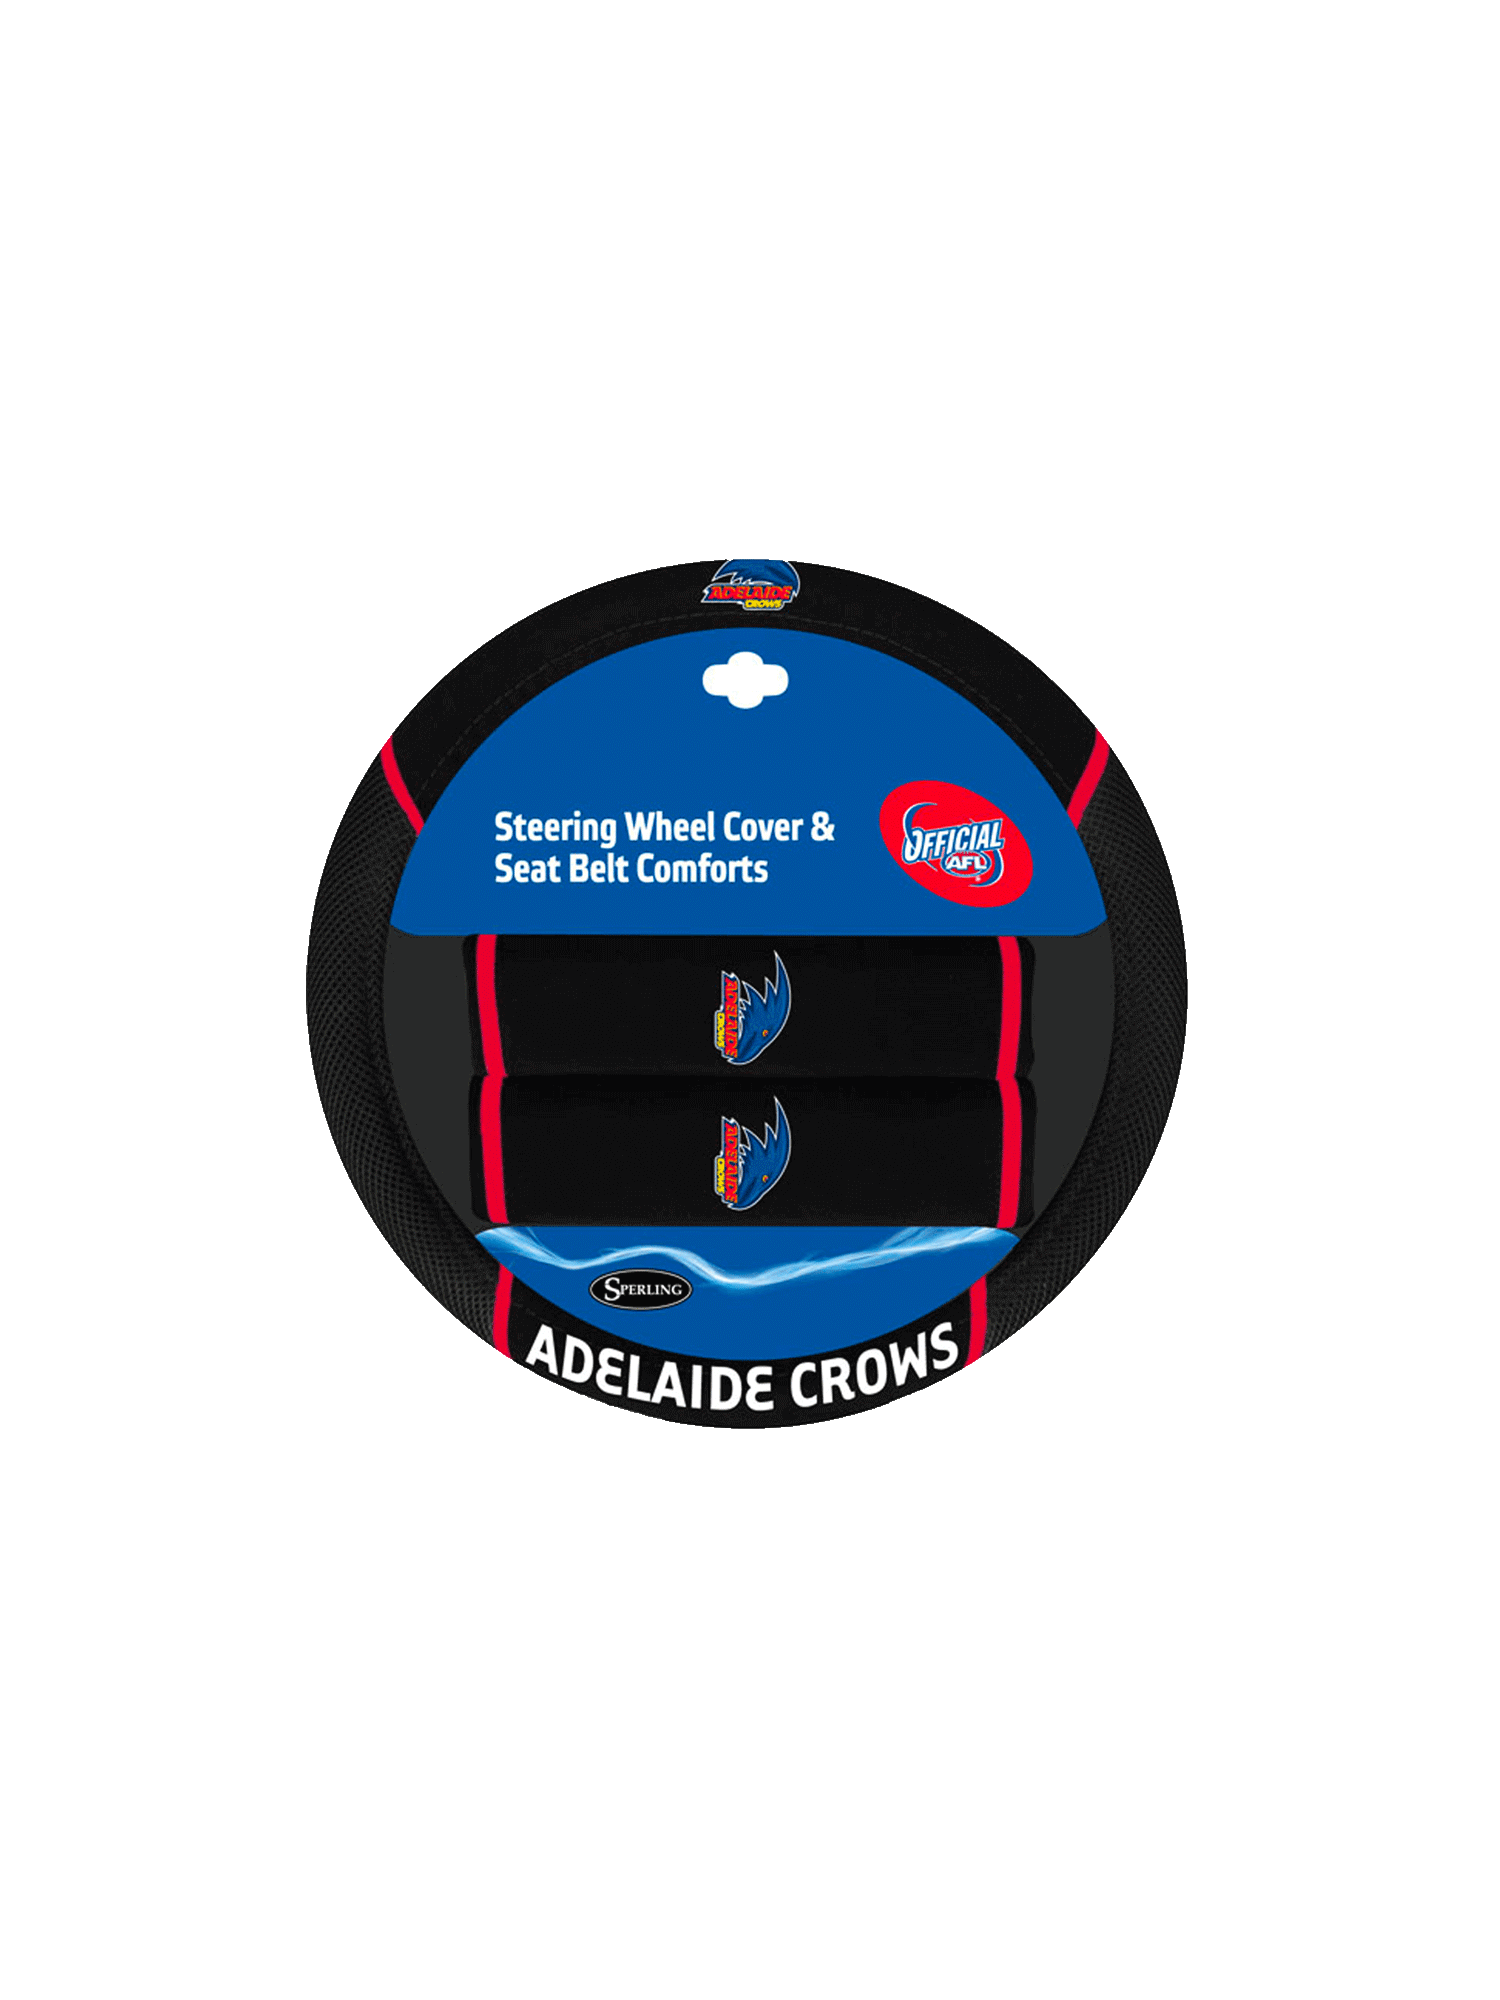 ADELAIDE CROWS STEERING WHEEL COVER AND SEAT BELT COMFORT SET_ADELAIDE CROWS_ STUBBY CLUB